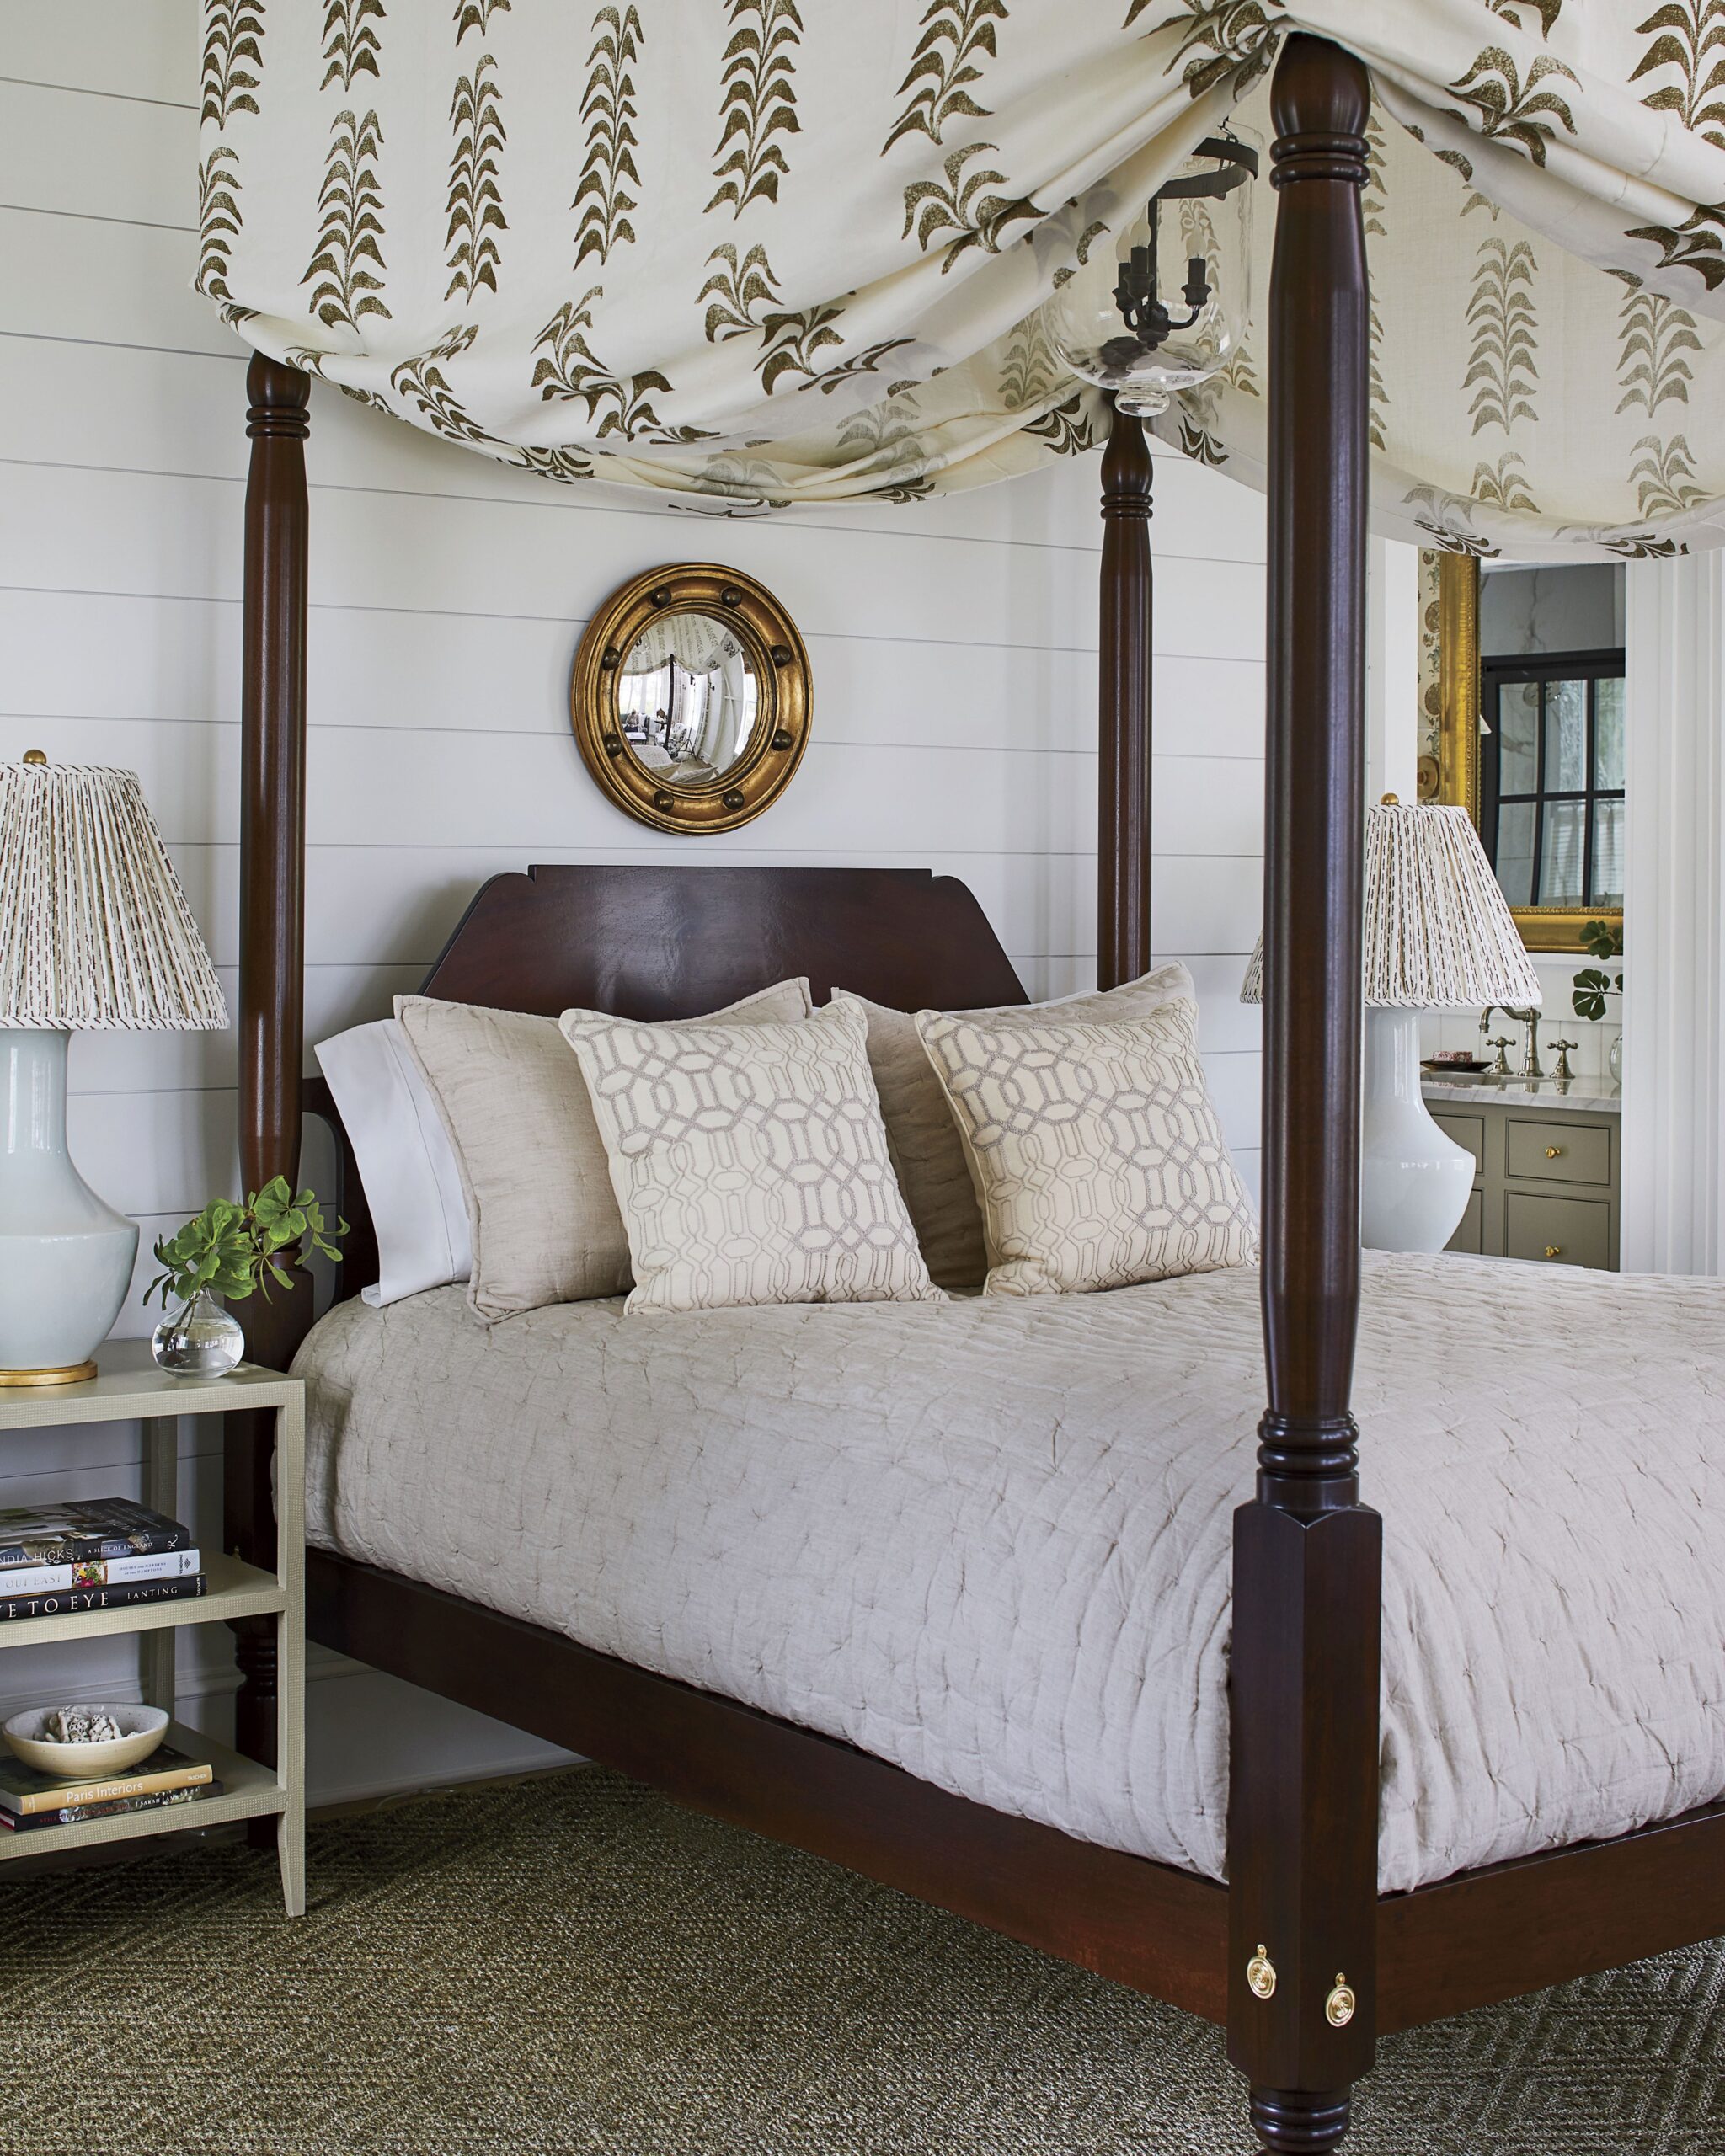 traditional Florida beach bedroom featured in home tour